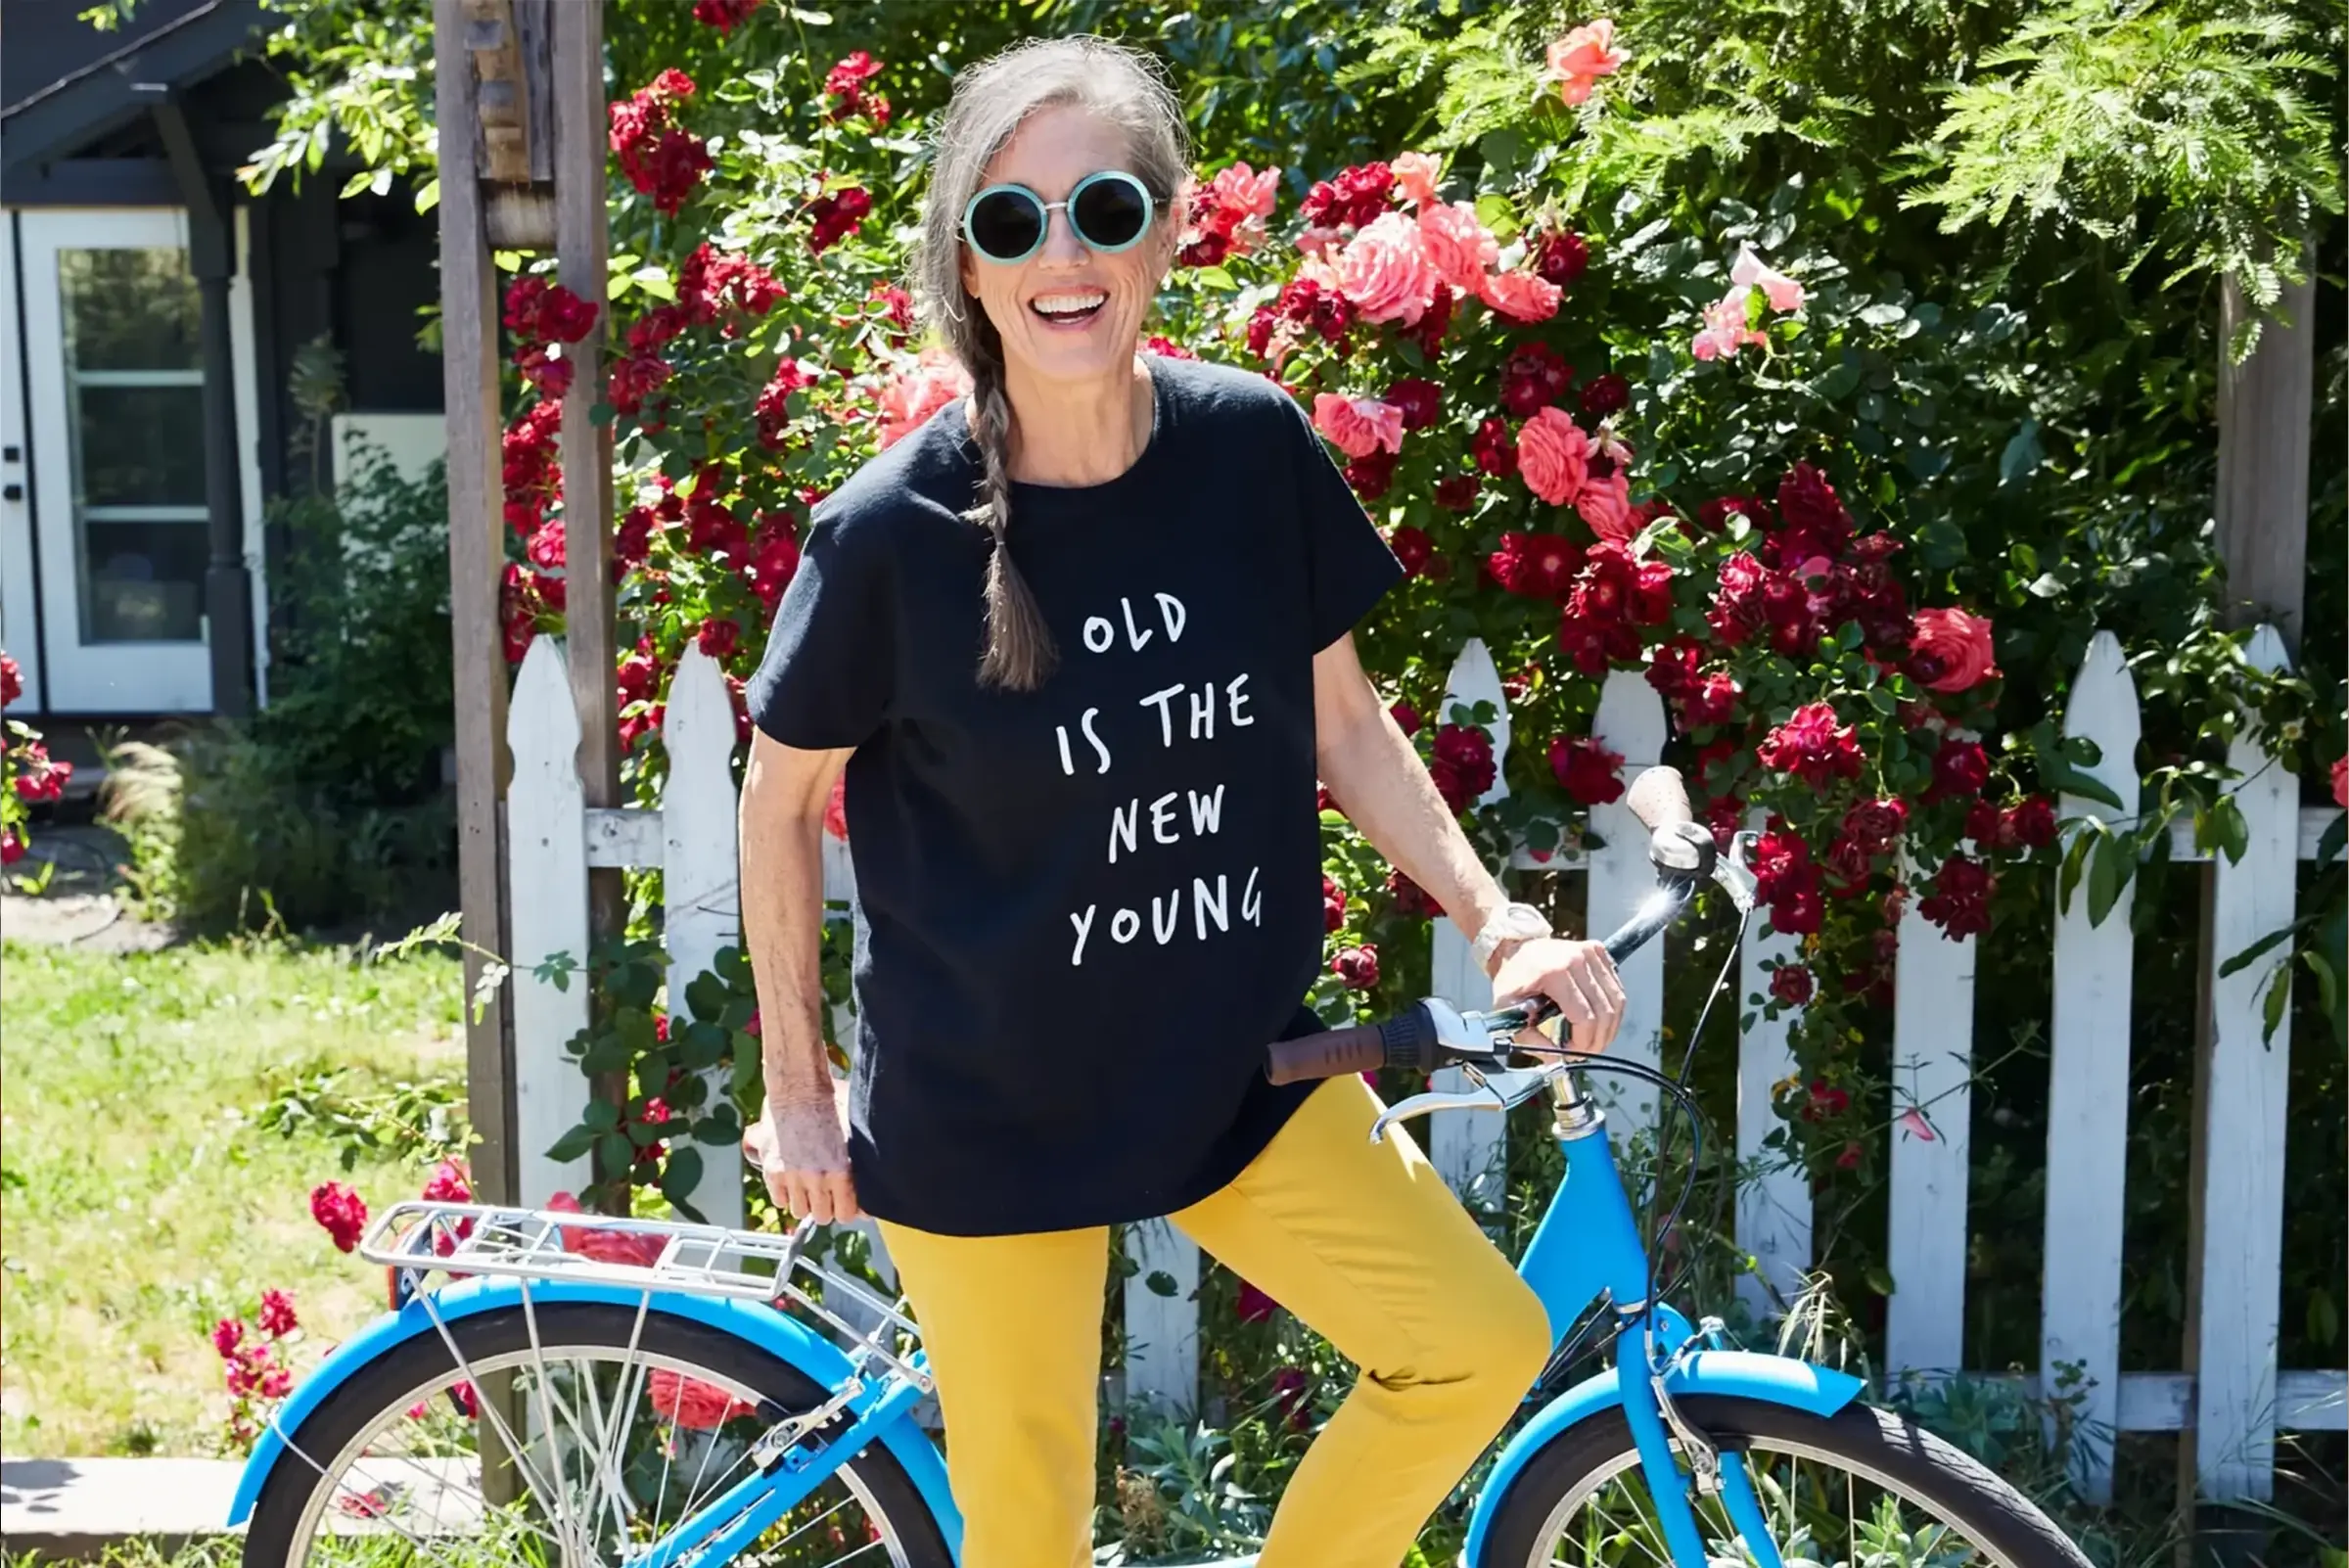 independent living resident standing by bike with old is the new young shirt